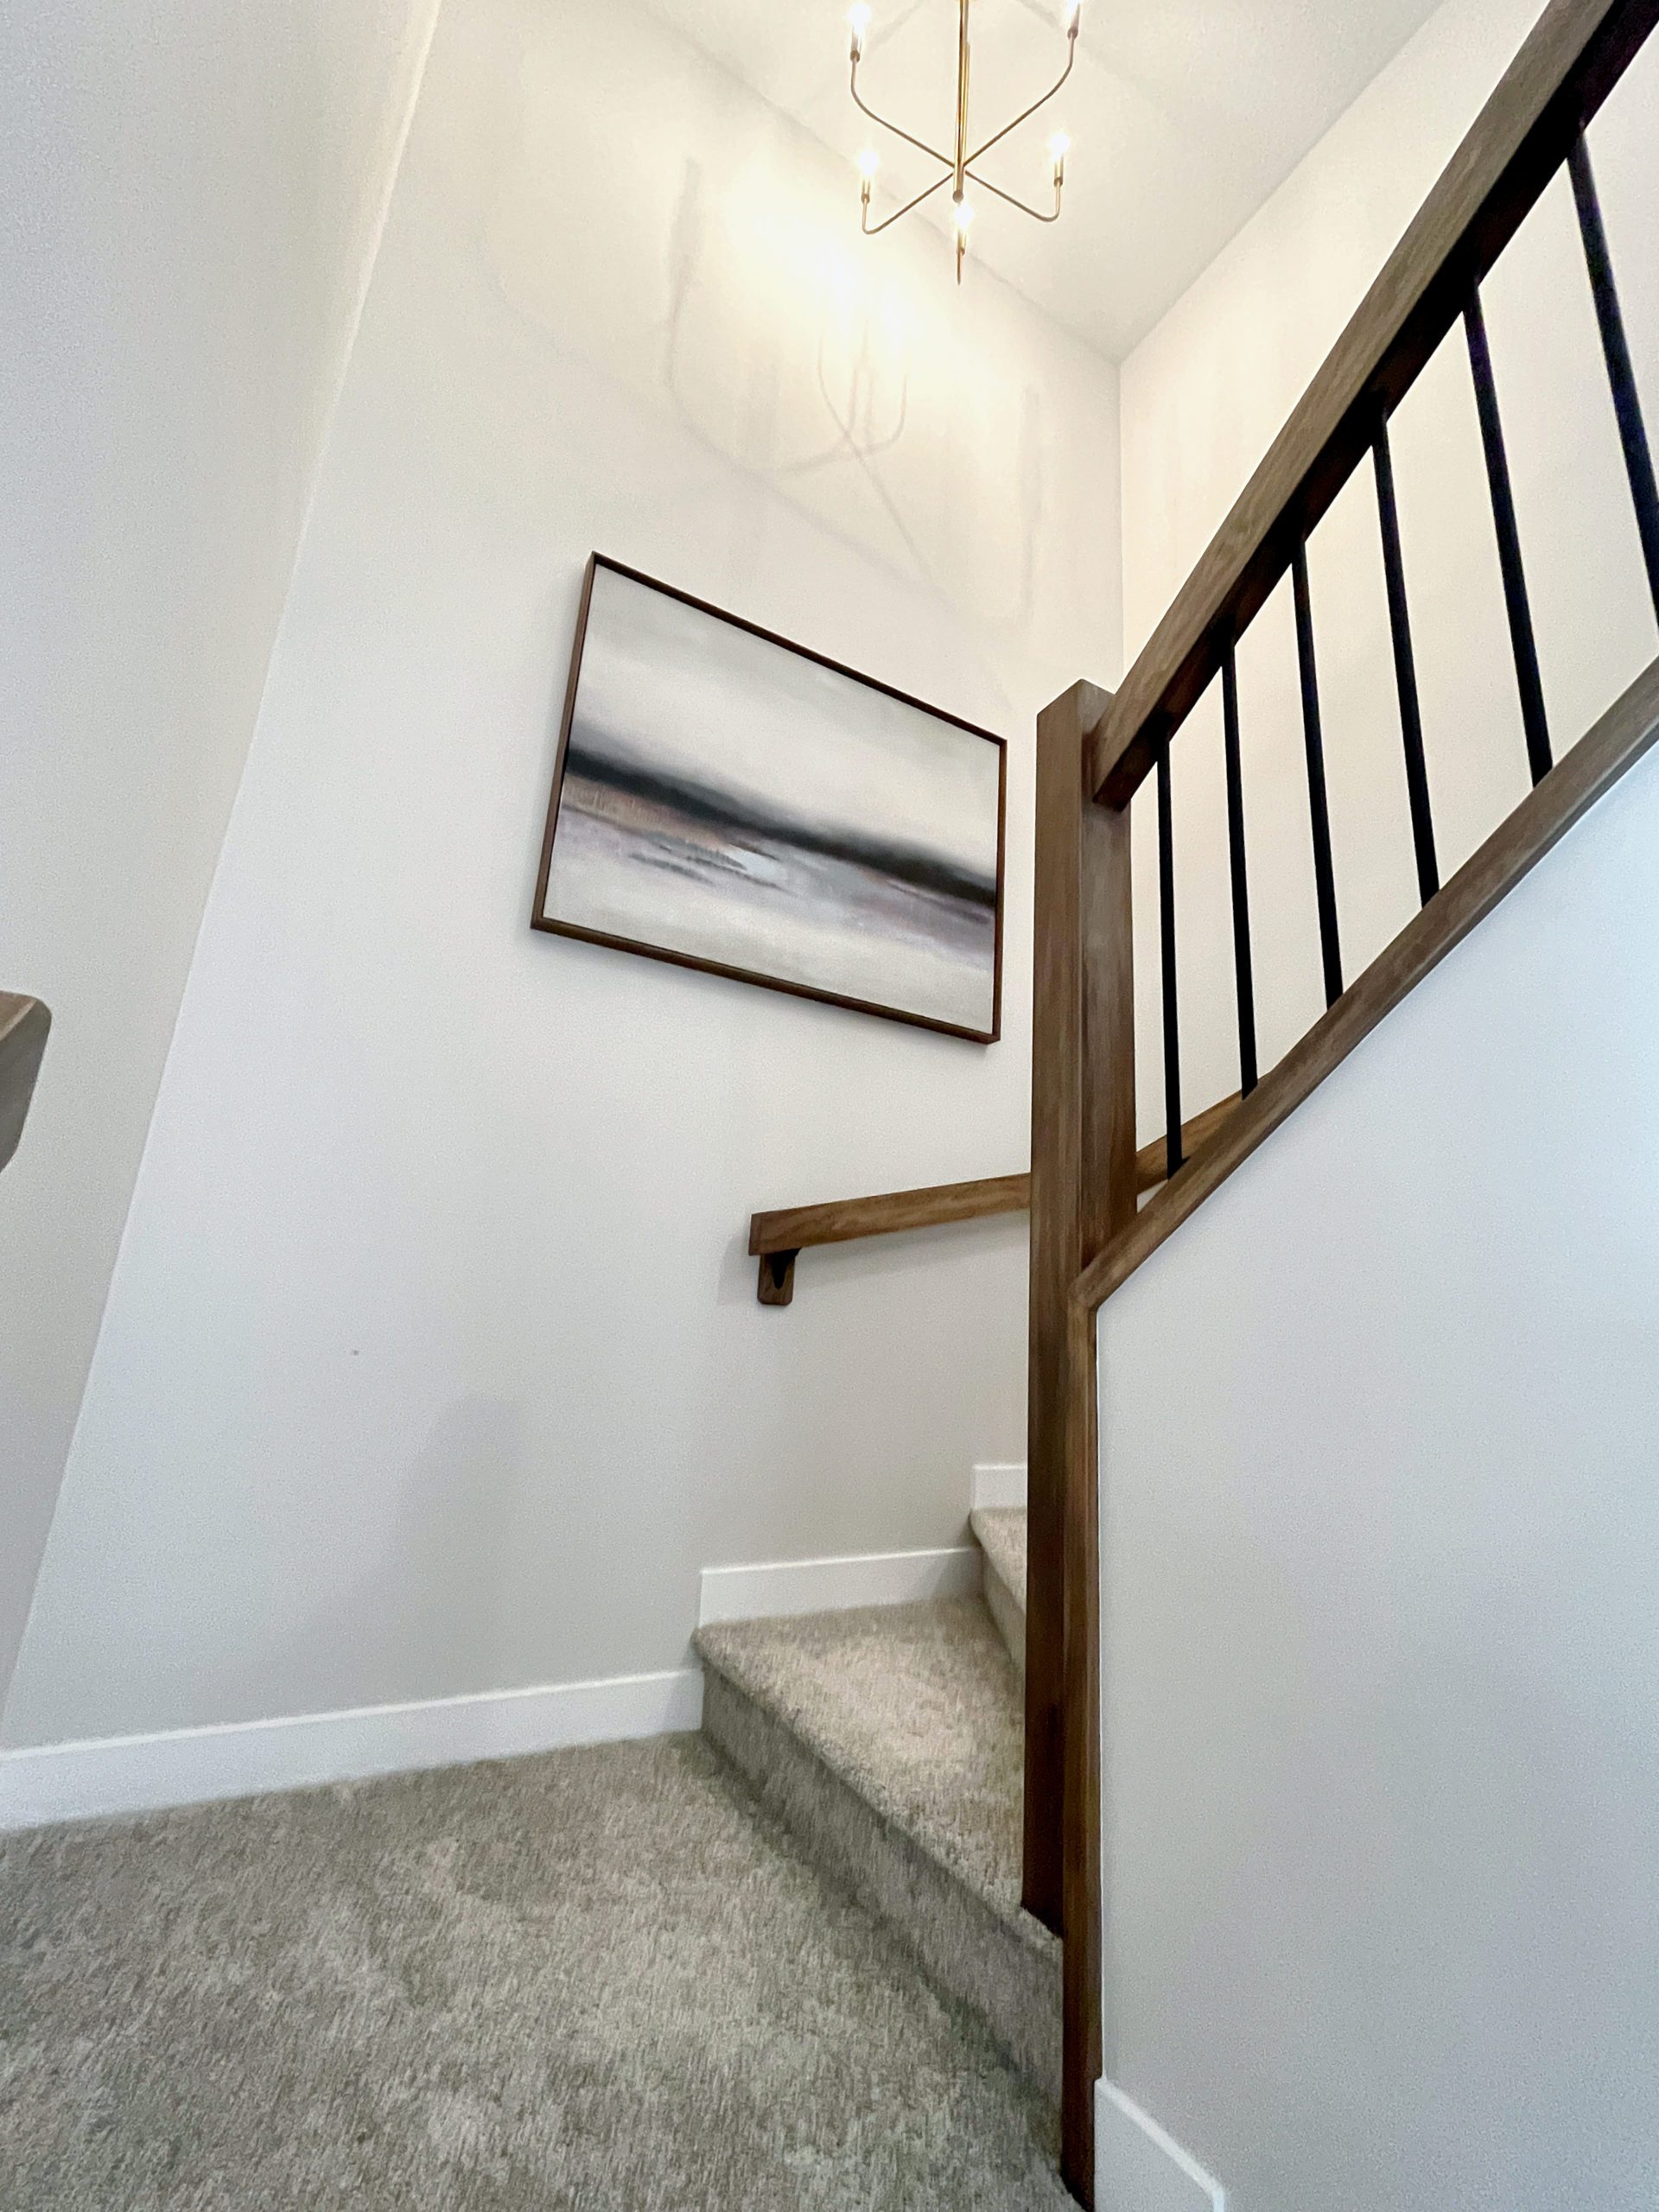 Shows the stairwell to the second level with picture hanging on a wall and chandelier above.